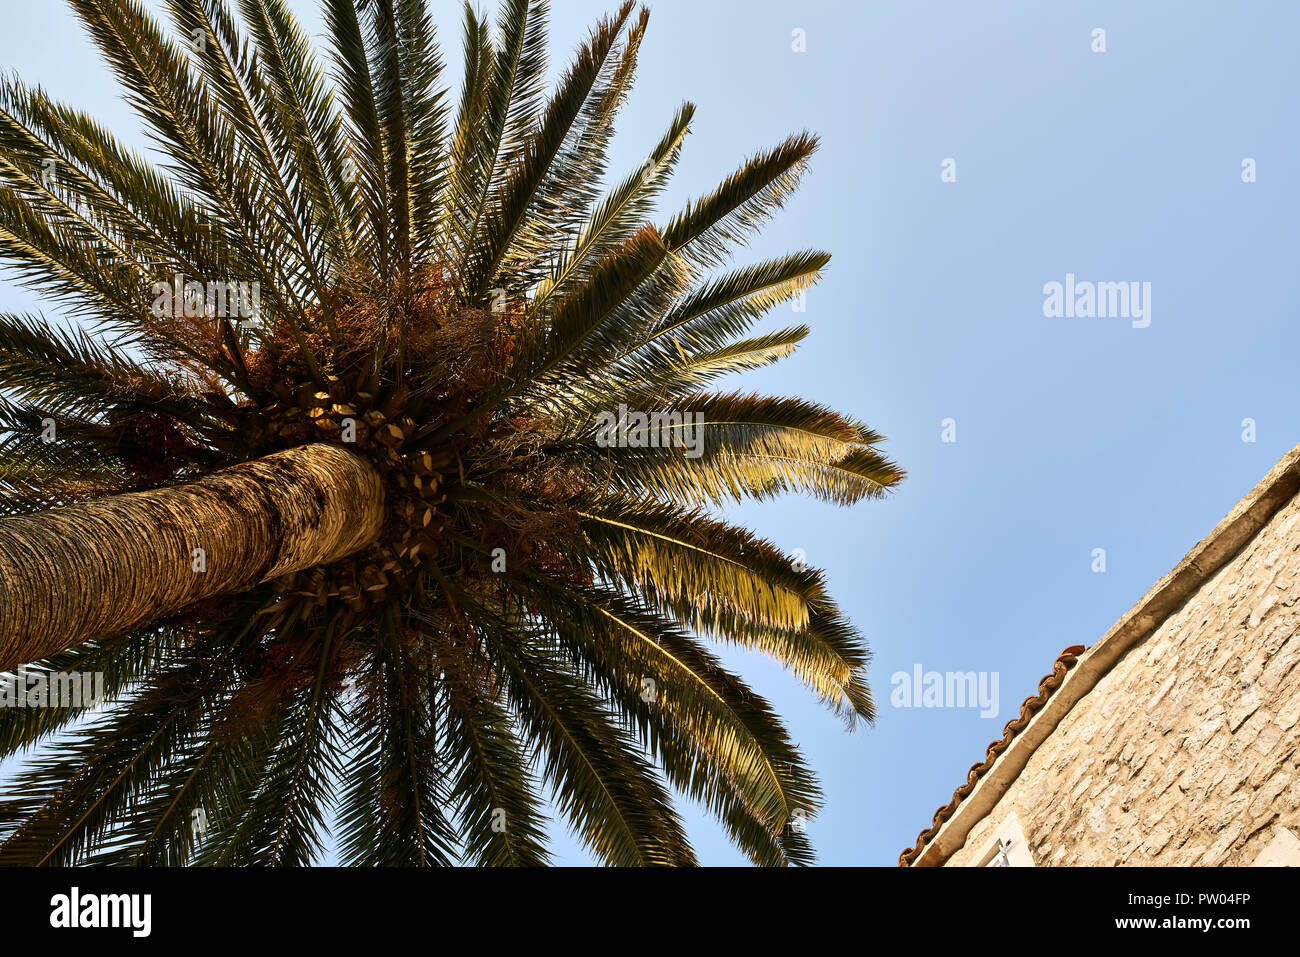 View from downward at the palm tree with green-brown leaves and a stone house on the blue sky background. Sun is shining on them. Horizontal. Stock Photo